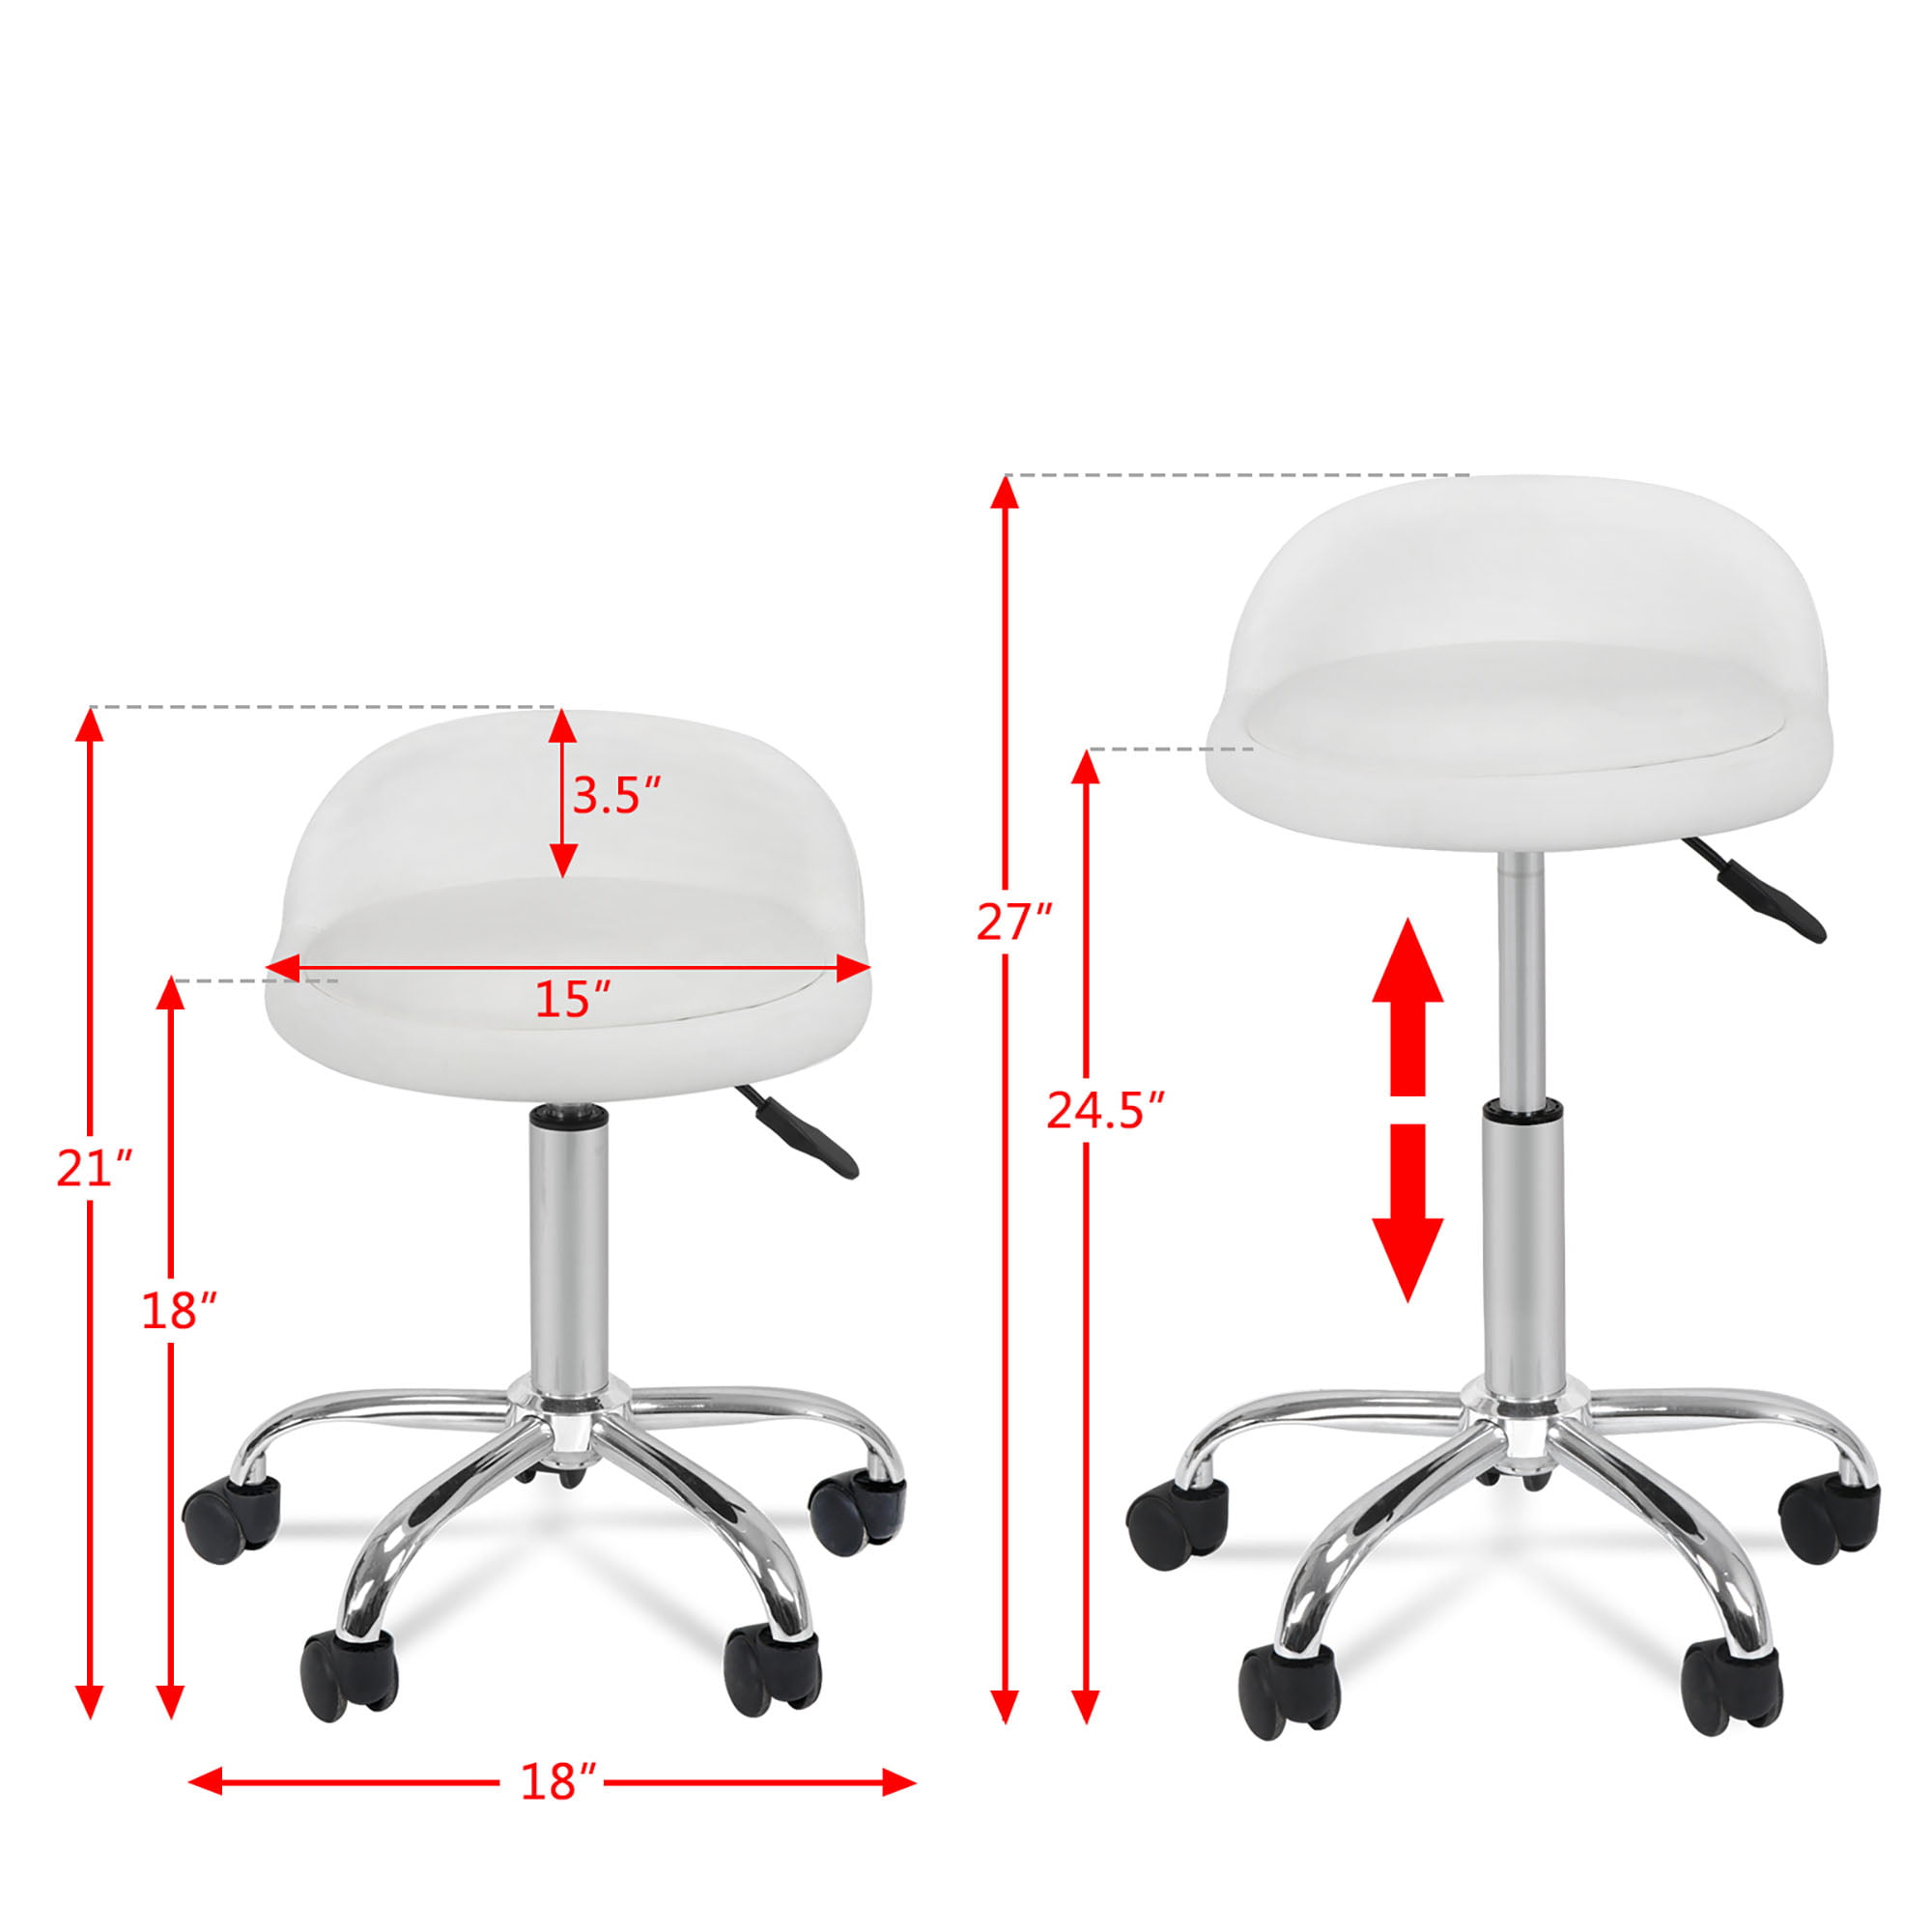 Nazalus Saddle Stool Chair with Back Support, Heavy-Duty(350LBS), Hydraulic  Rolling Swivel Adjustable Stool Chair for Salon Spa Beauty Massage Dental